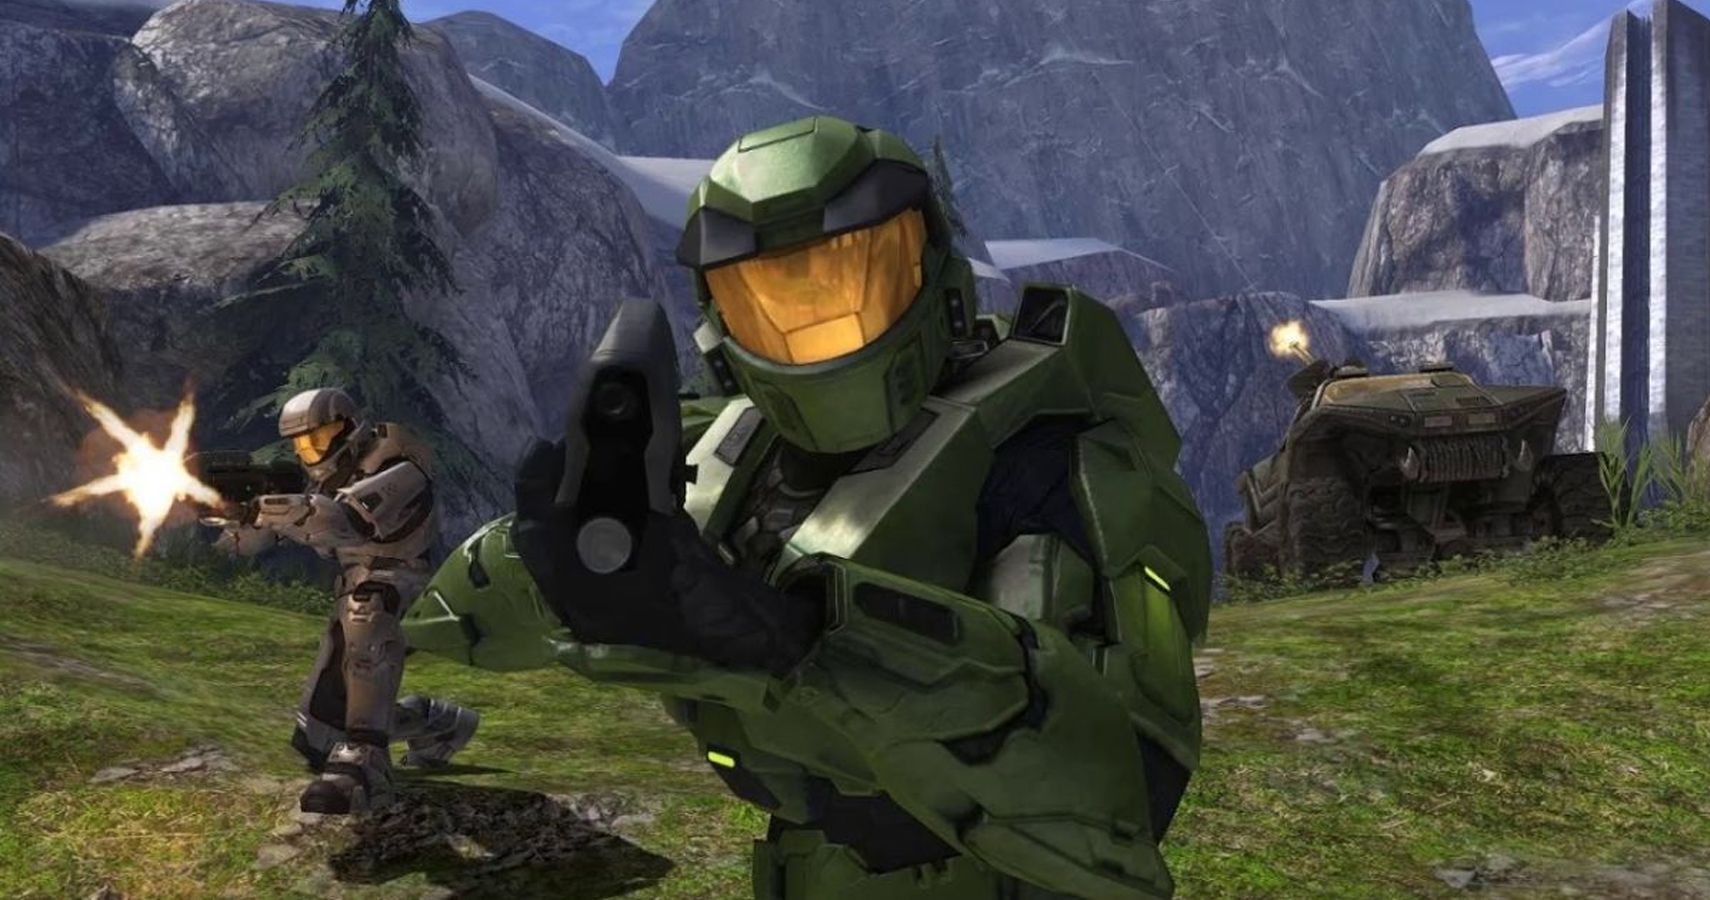 where to get halo 1 for pc